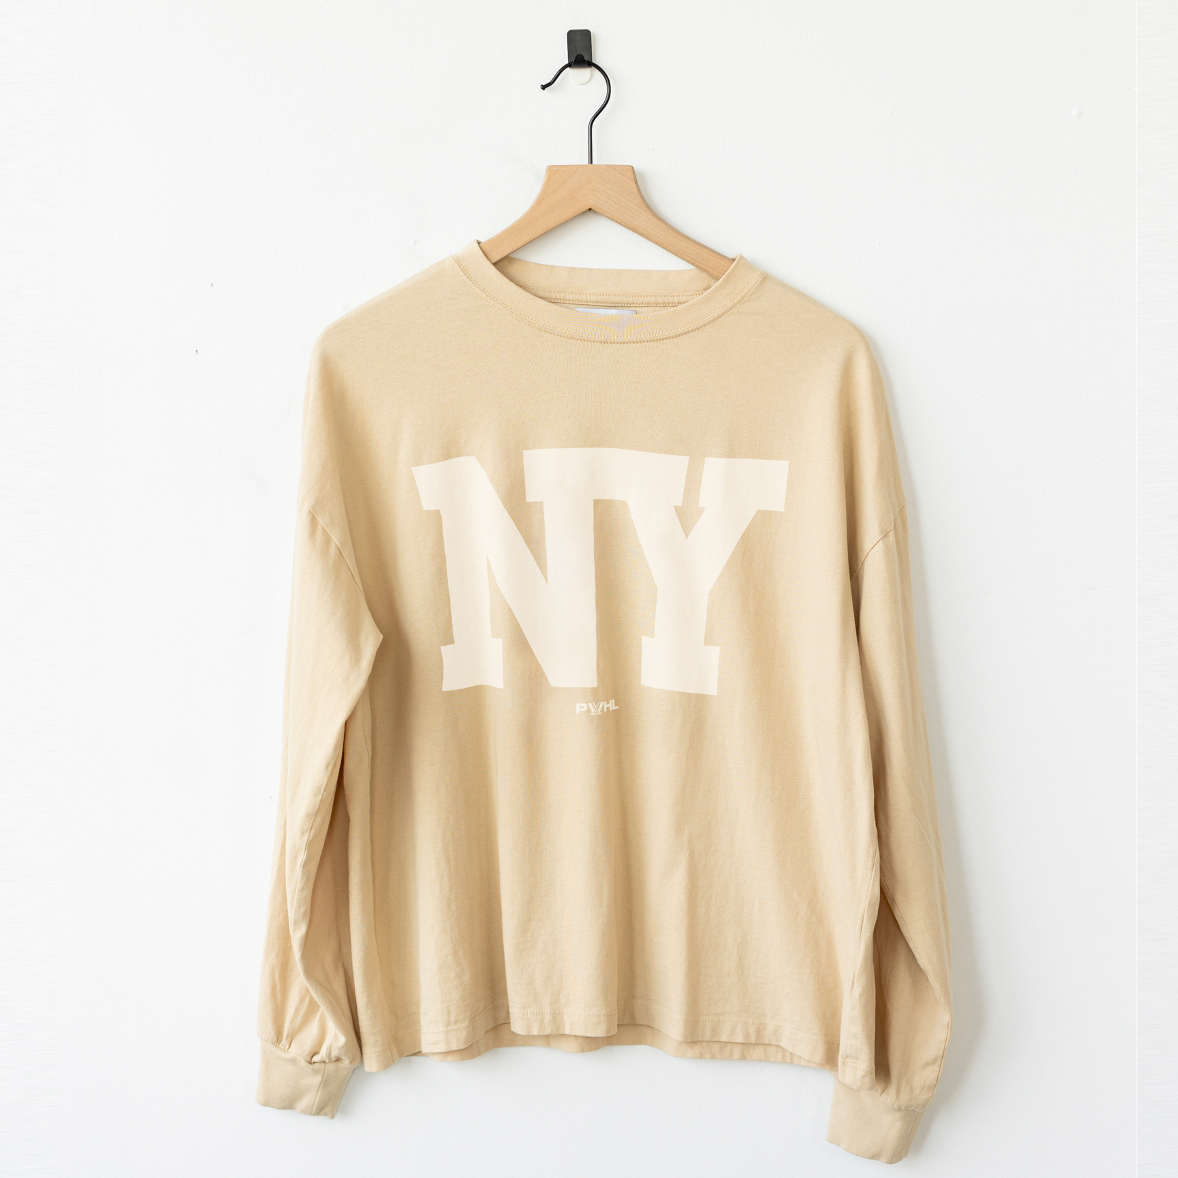 New York Long Sleeve T-Shirt – The Official Shop of the PWHL